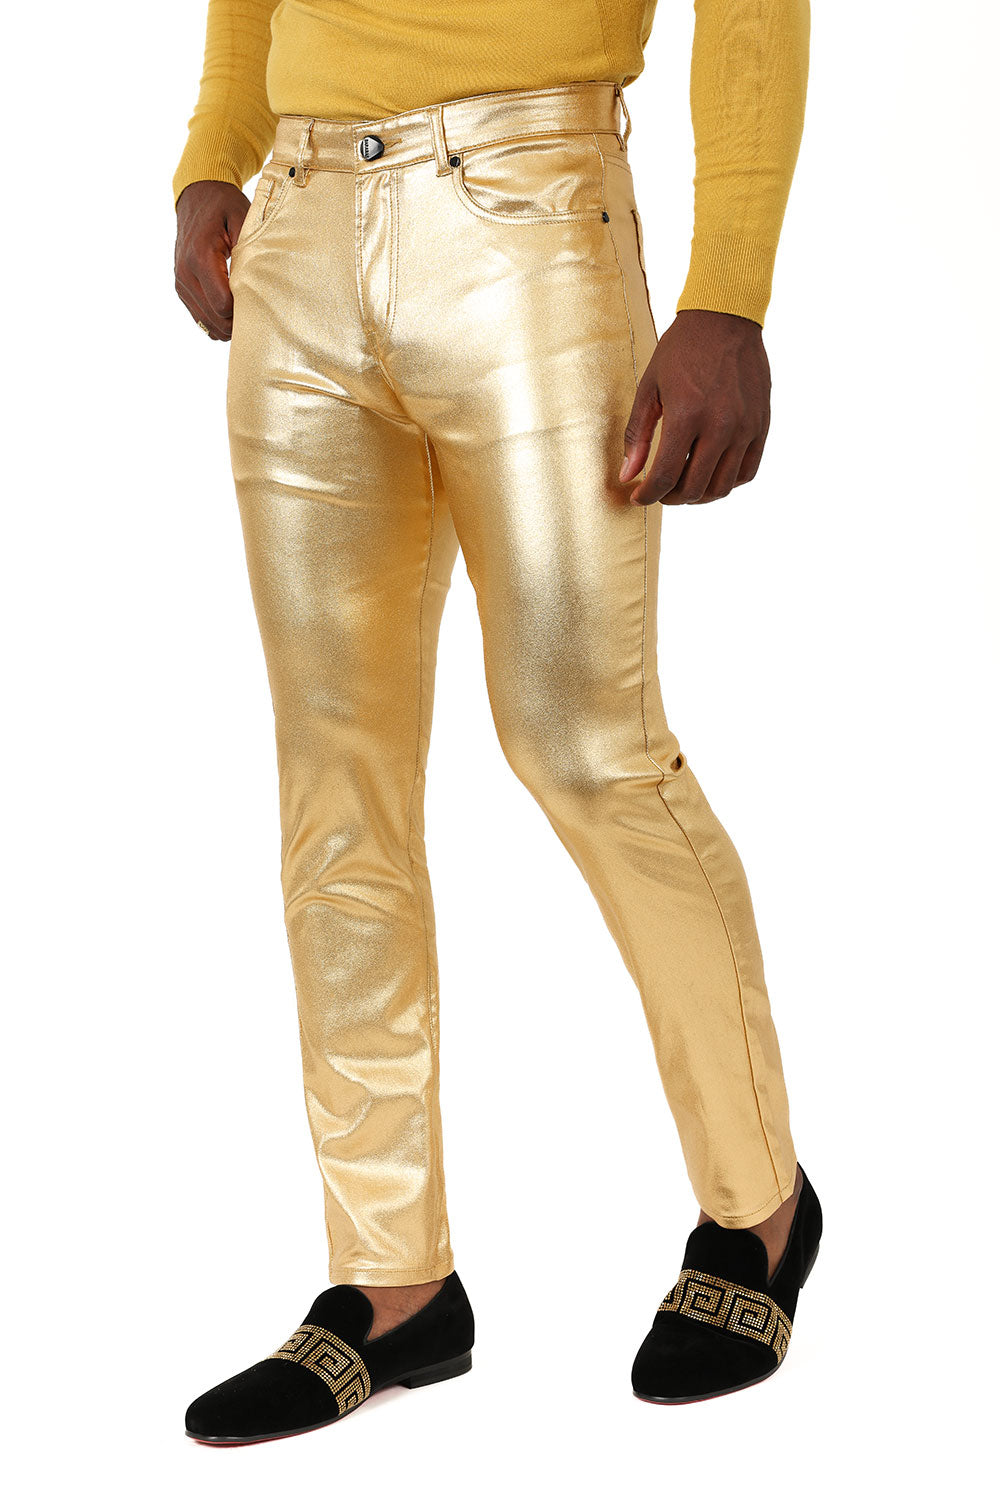 Barabas Men's Glossy Shiny Design Sparkly Luxury Dress Pants 2CPW27 Gold